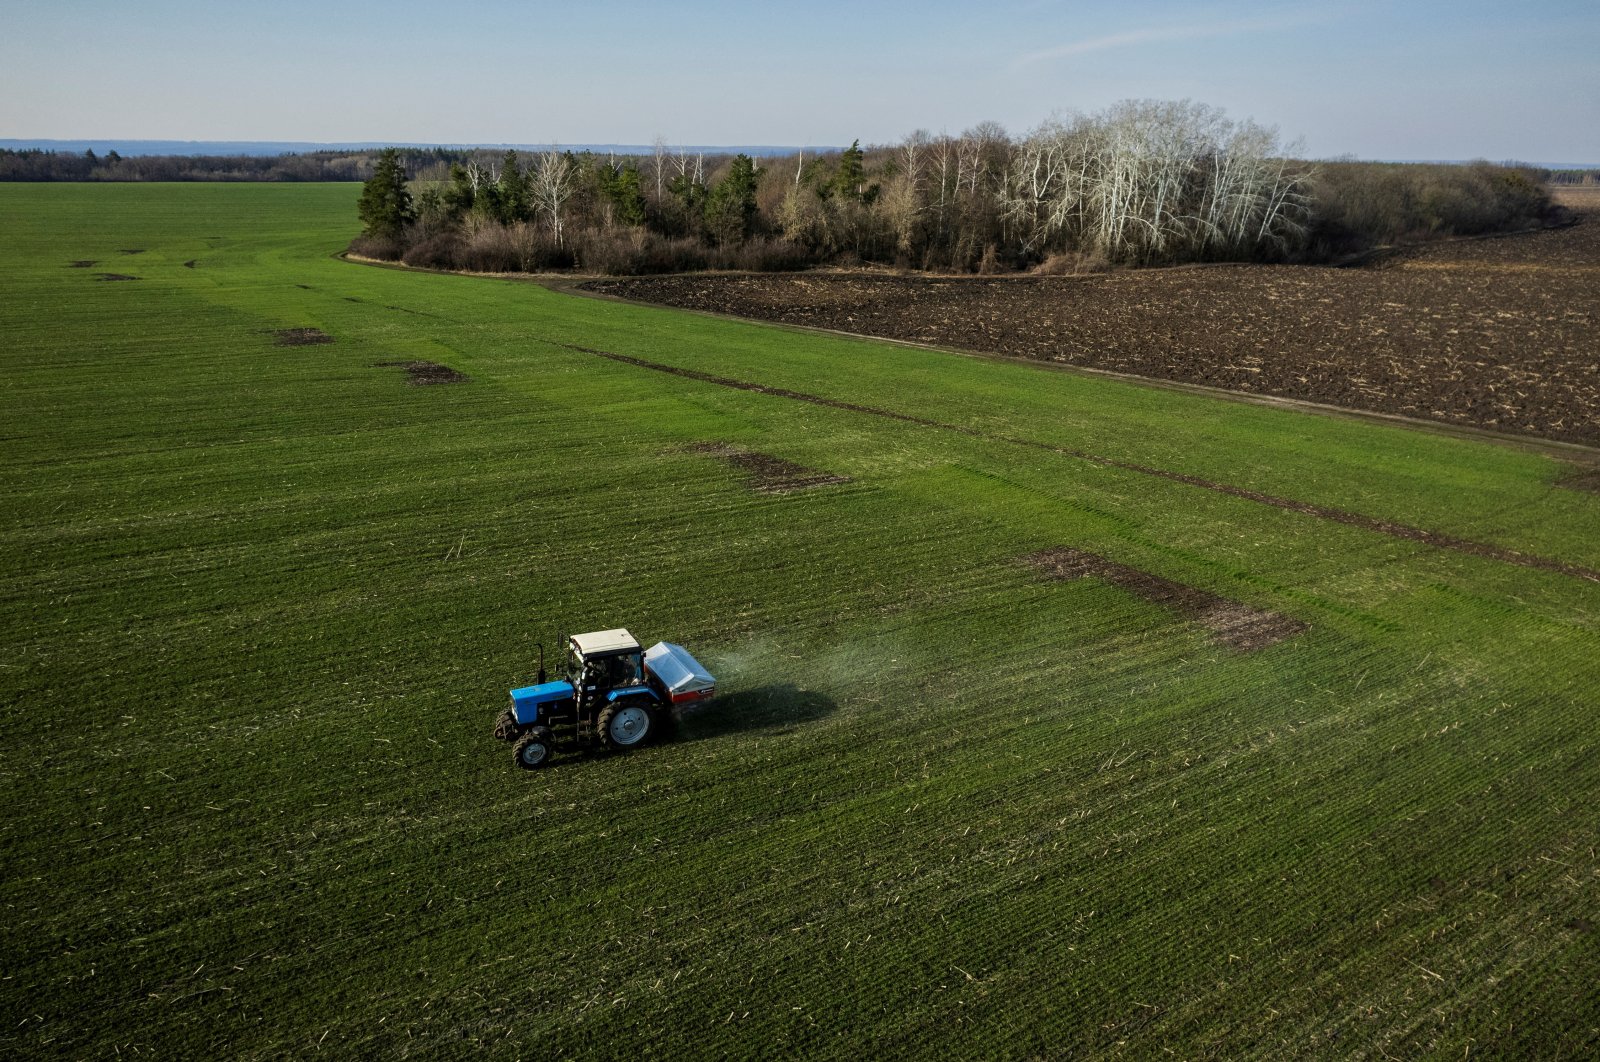 An aerial view shows a tractor spreading fertilizer on a wheat field near the village of Yakovlivka after it was hit by an aerial bombardment, Kharkiv, Ukraine, April 5, 2022. (Reuters Photo)